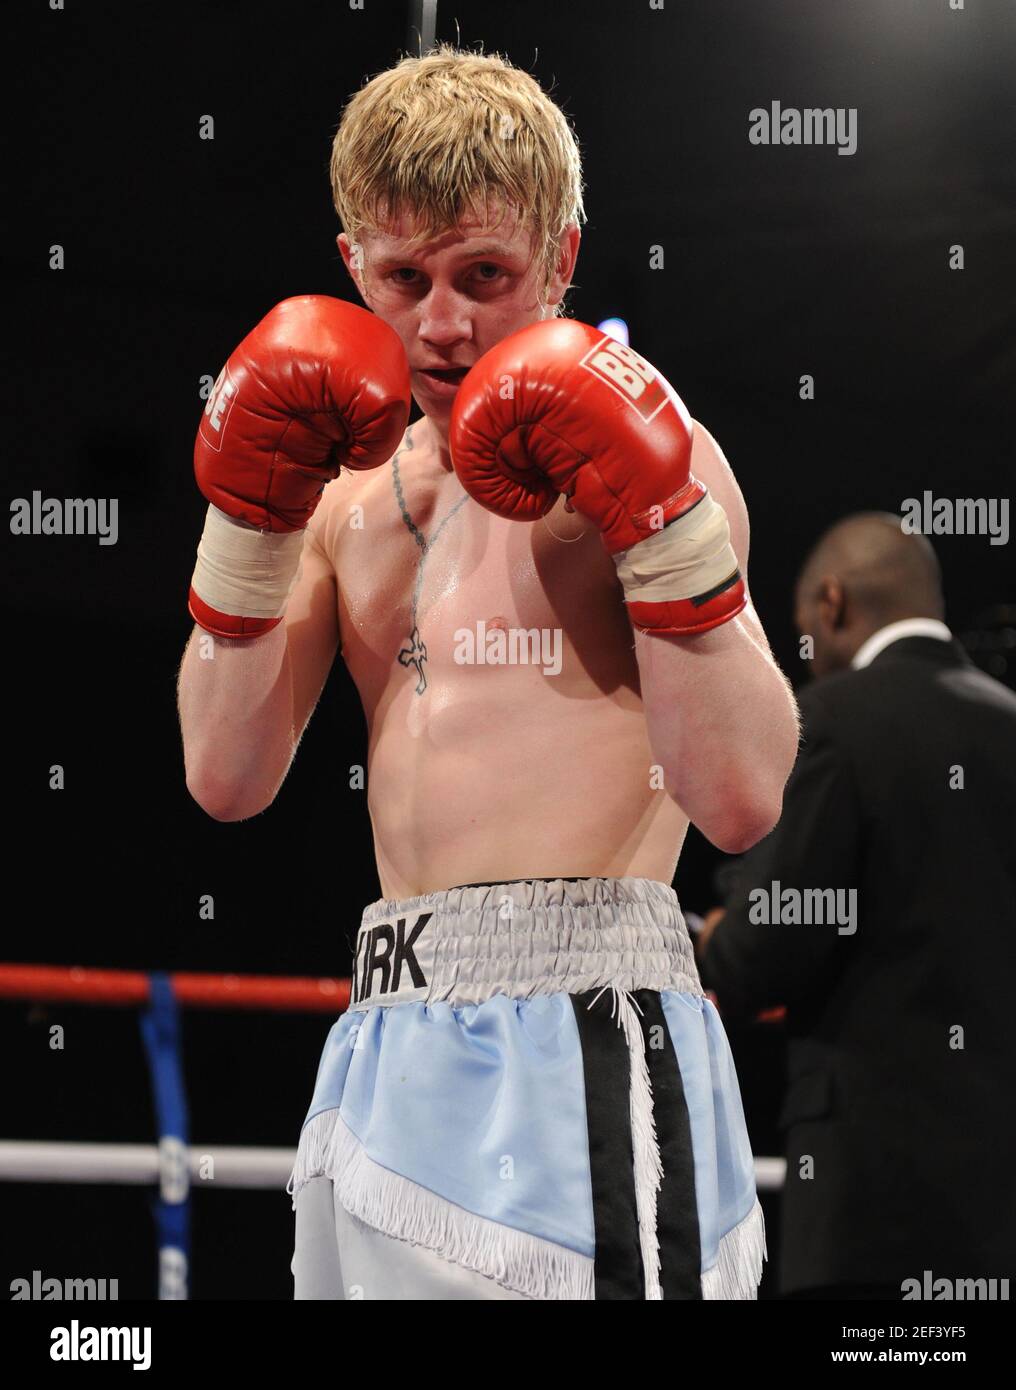 Boxing - Kirk Goodings v Pavels Senkovs - Lightweight Fight - Leigh Indoor Sports Village - 19/3/10  Kirk Goodings celebrates victory  Mandatory Credit: Action Images / Alex Morton Stock Photo